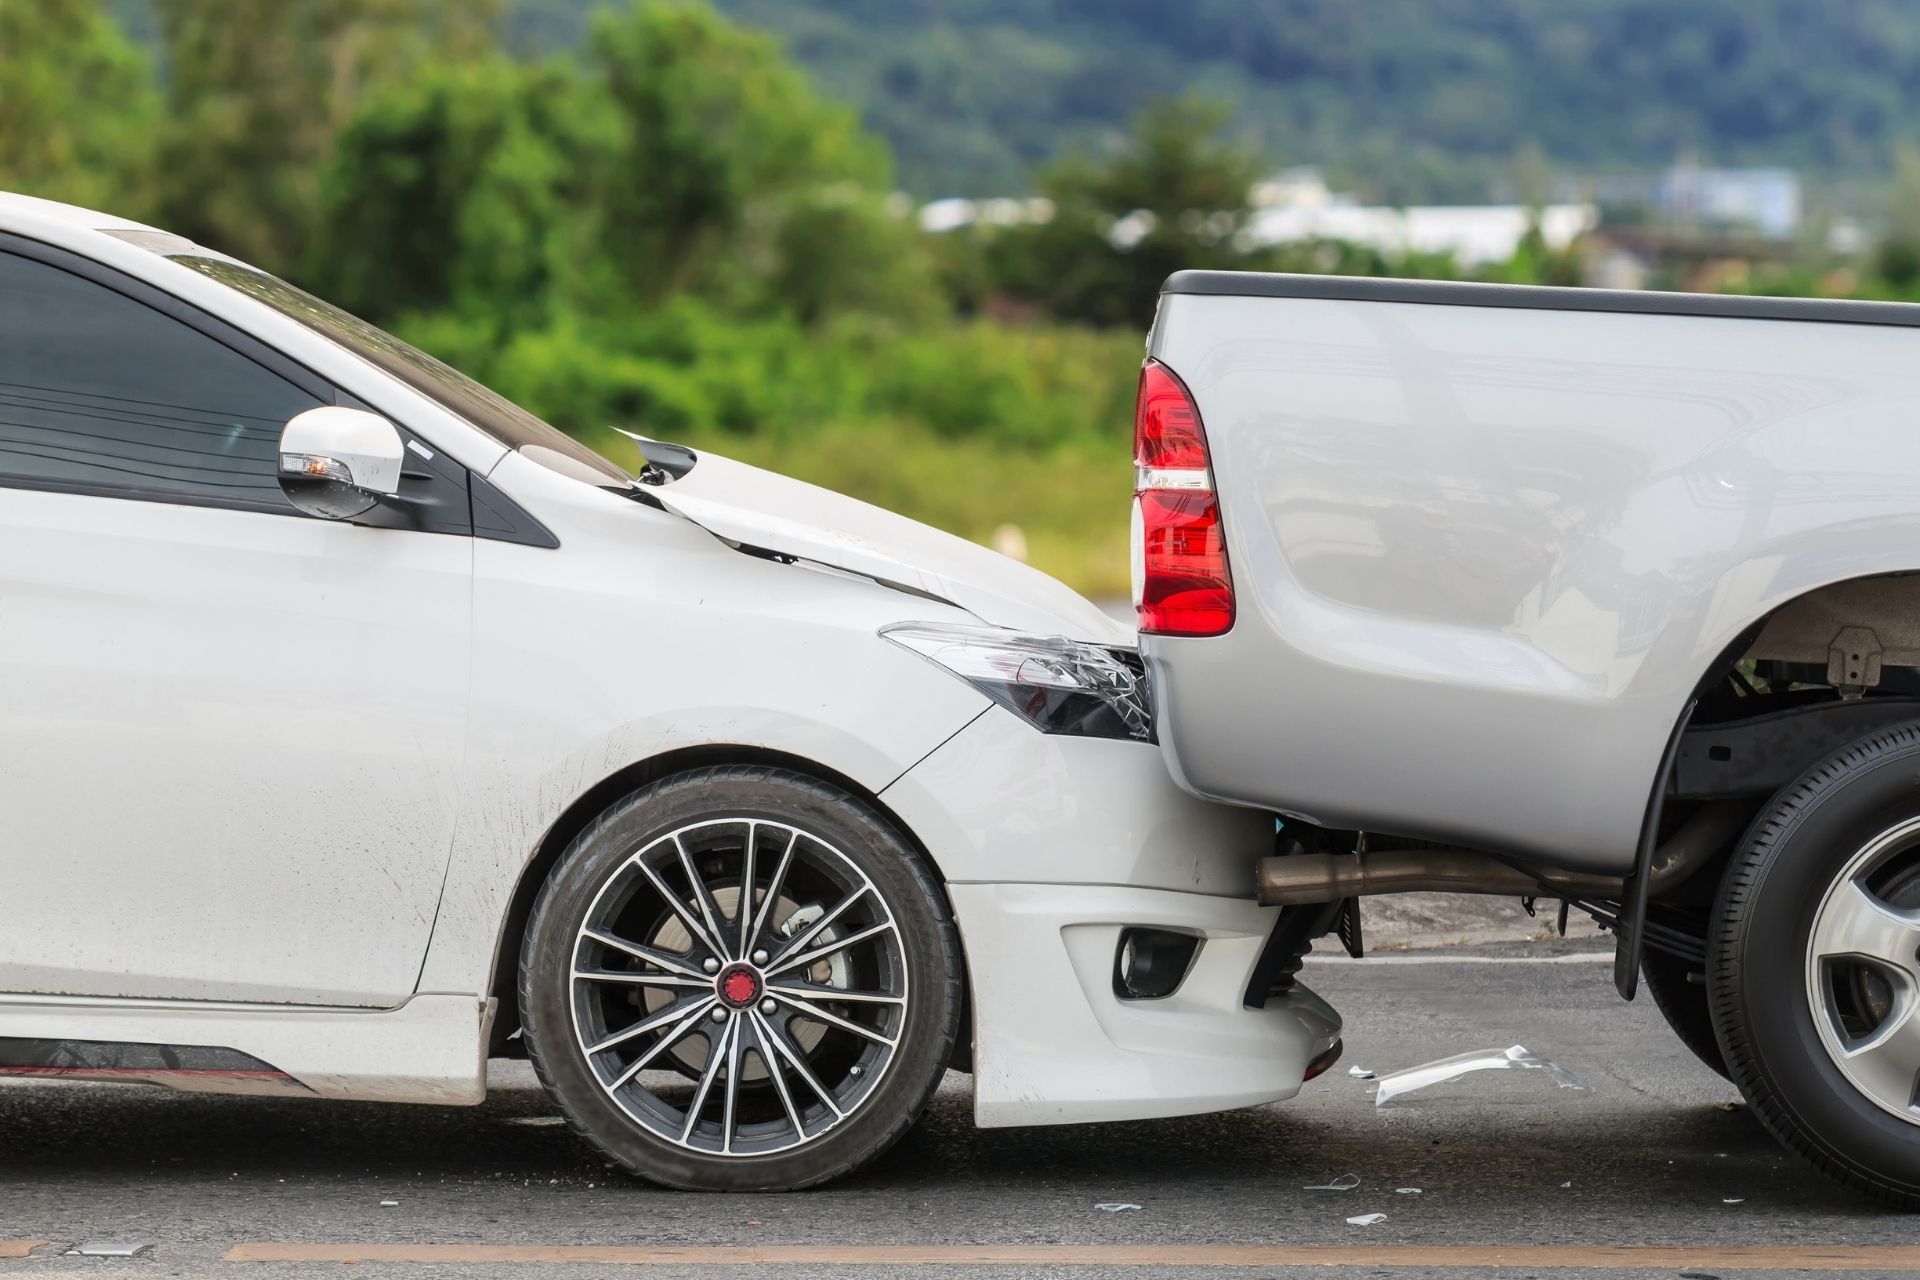 5 Hidden Problems Caused by Rear-End Collisions